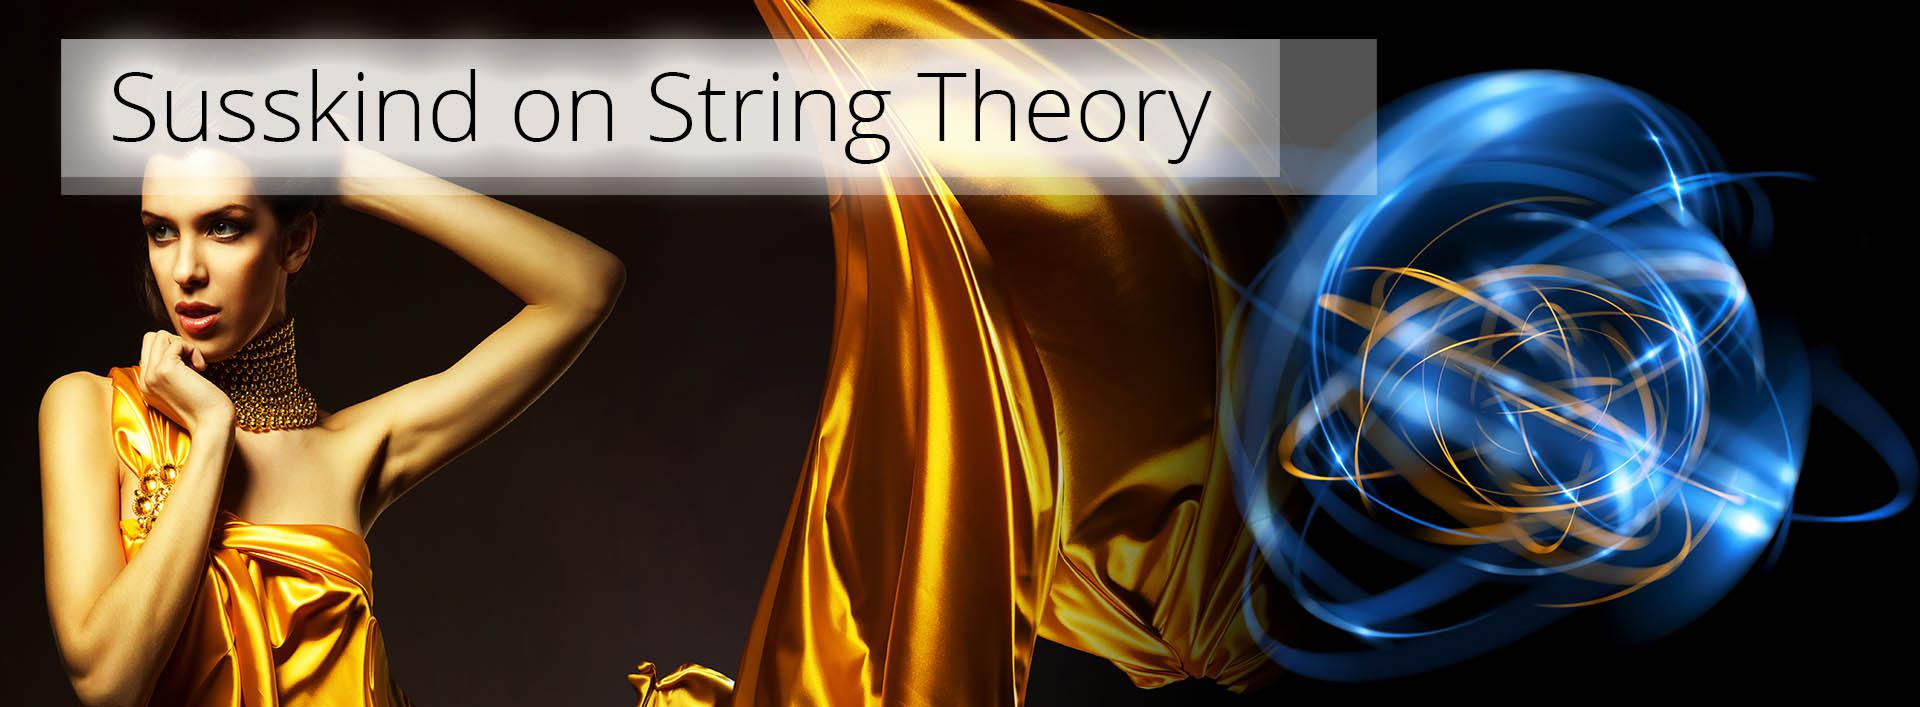 Susskind on String Theory